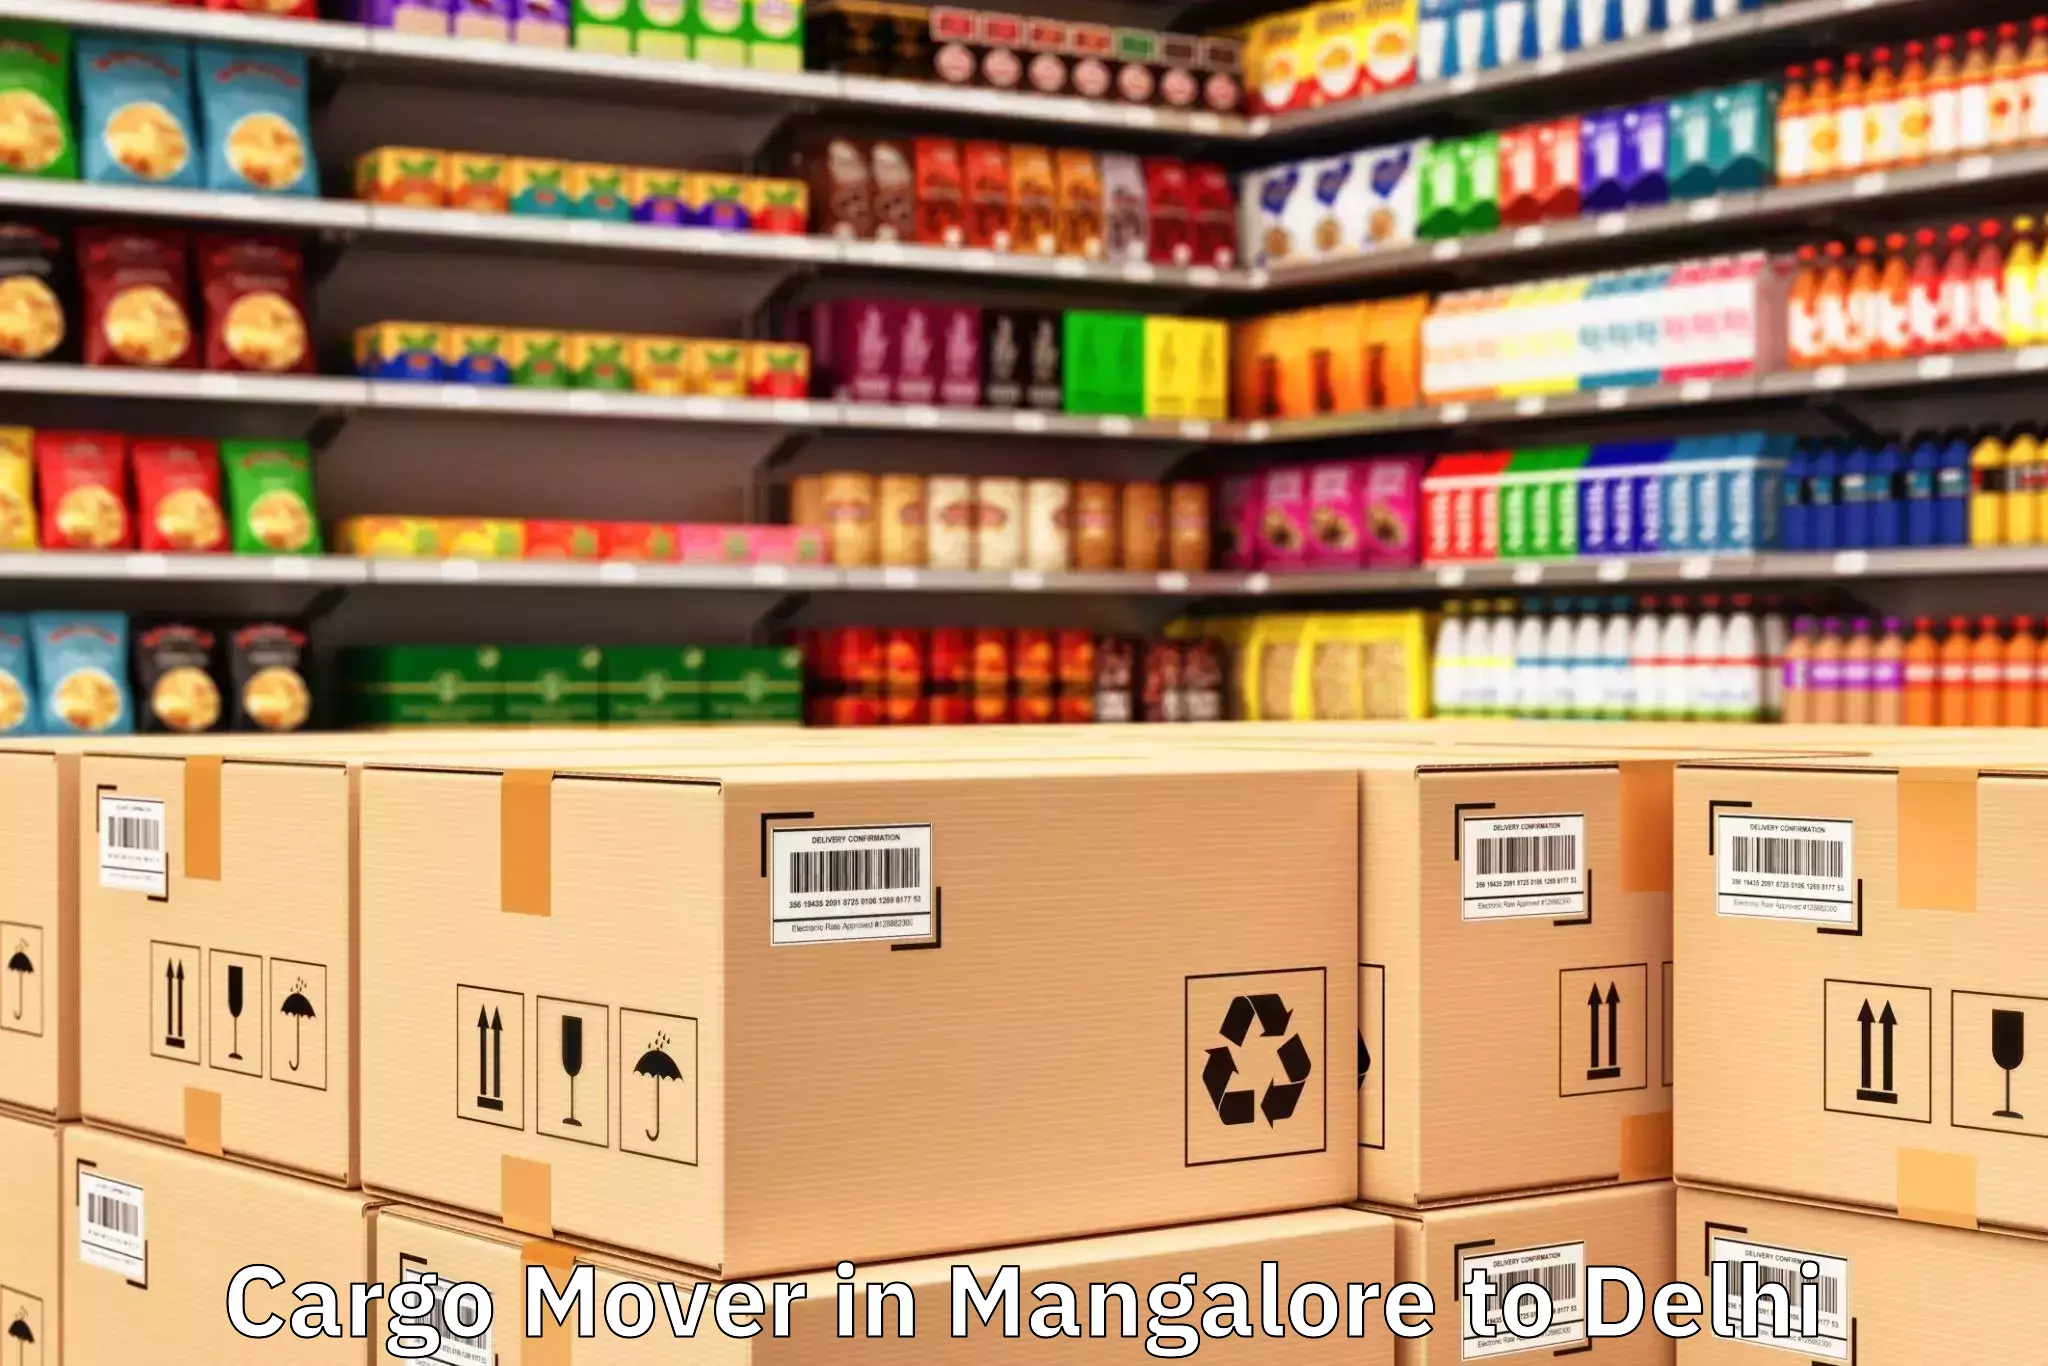 Expert Mangalore to Delhi Pharmaceutical Sciences And Research University New Delhi Cargo Mover